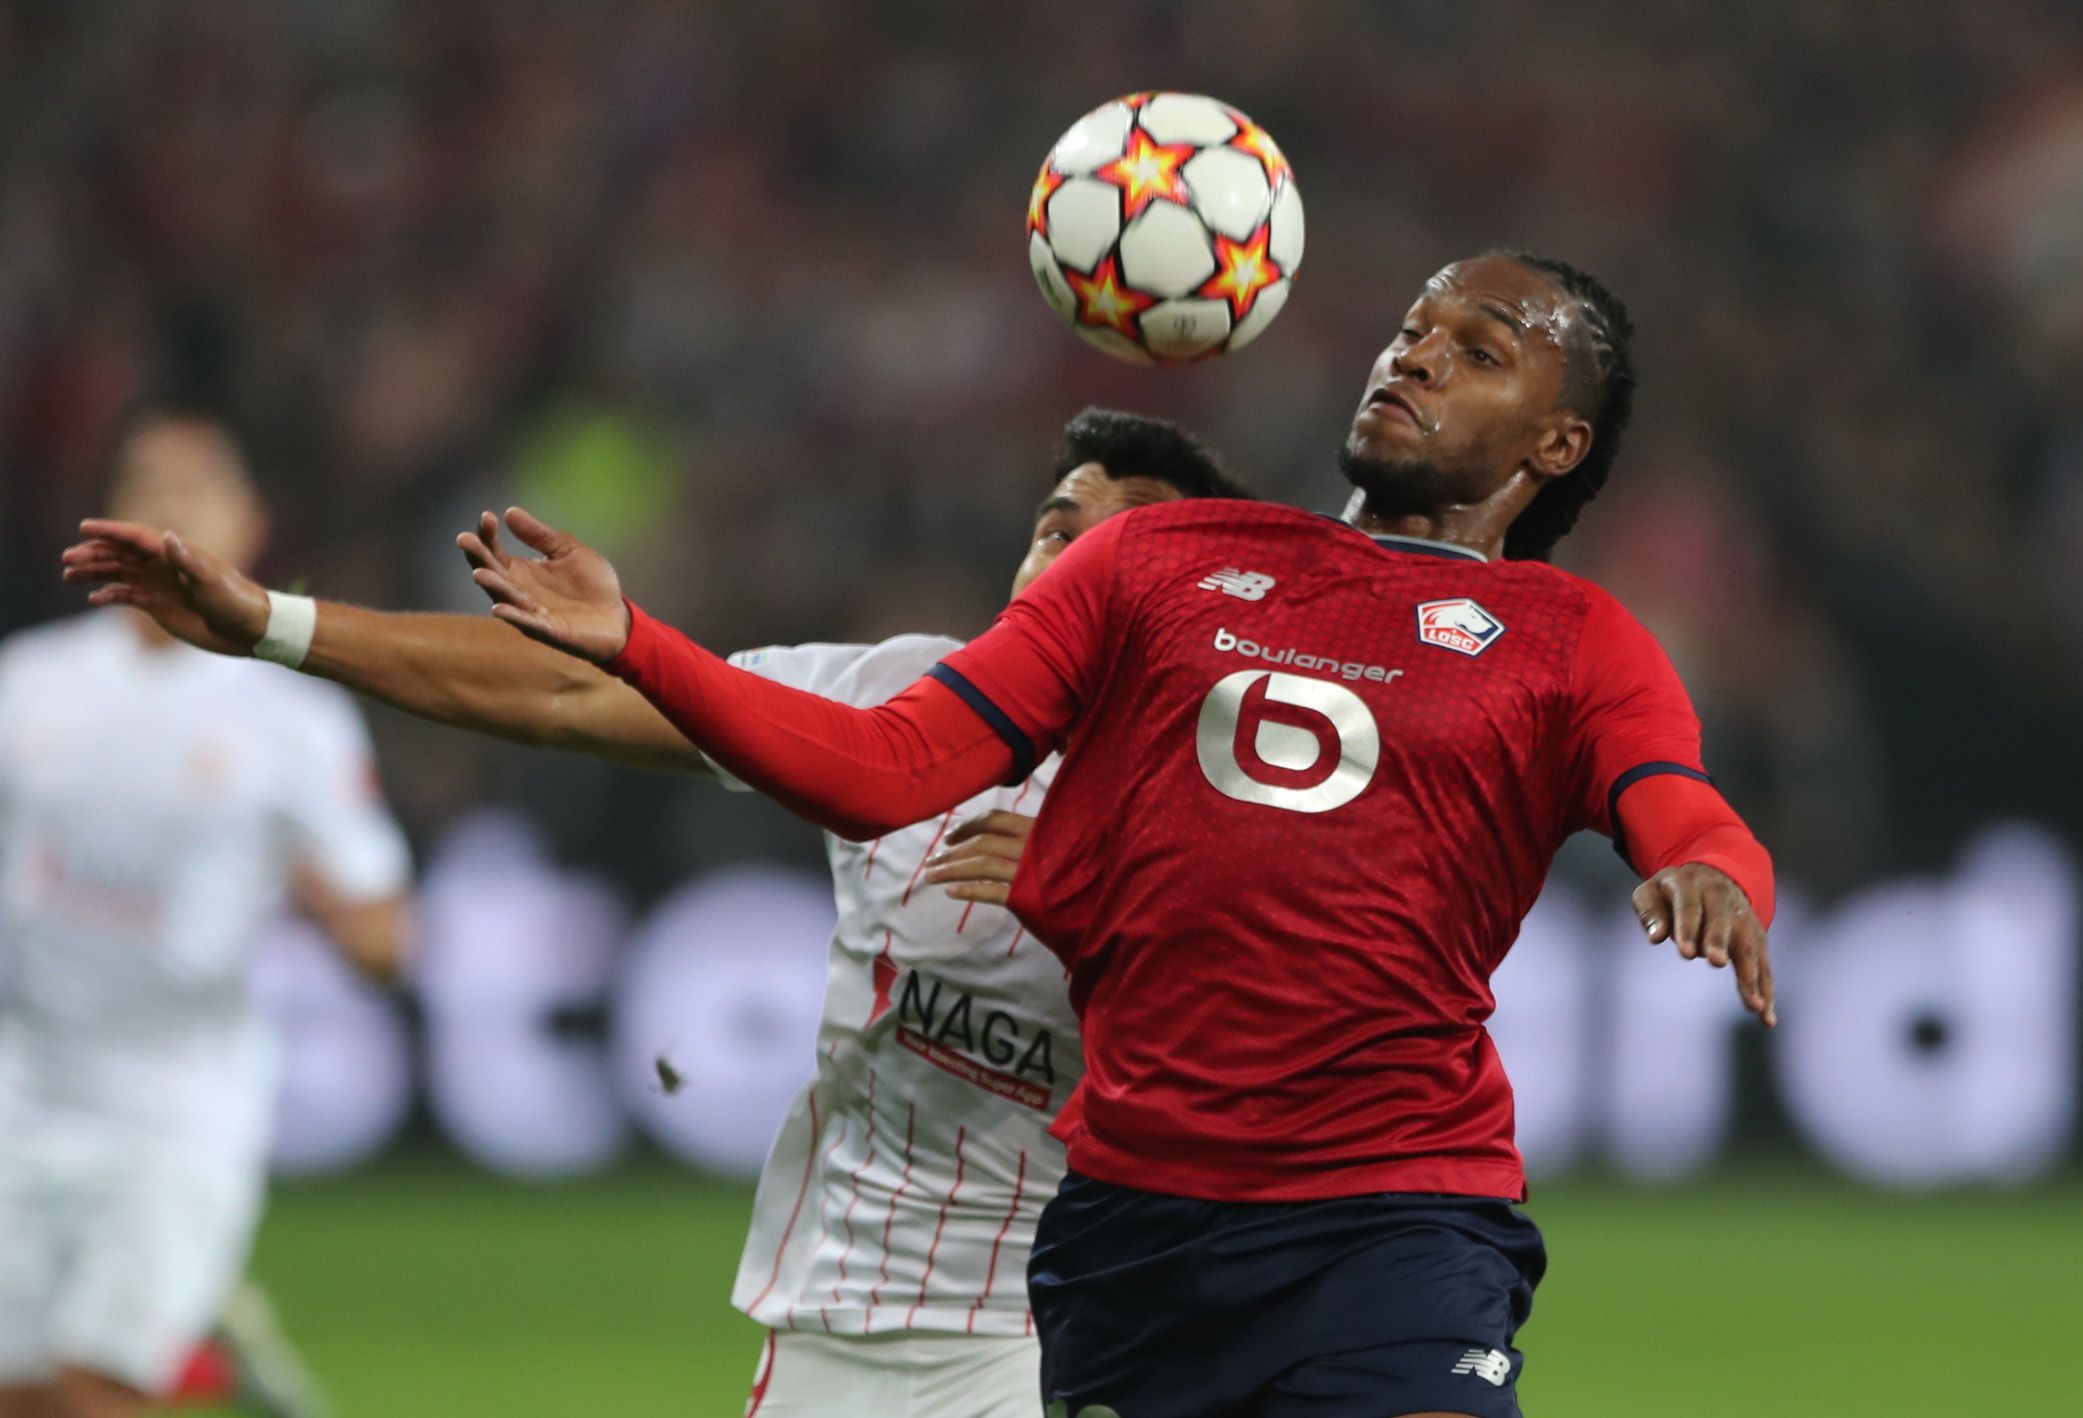 Soccer Football - Champions League - Group G - Lille v Sevilla - Stade Pierre-Mauroy, Lille, France - October 20, 2021 Lille's Renato Sanches in action with Sevilla's Marcos Acuna REUTERS/Pascal Rossignol